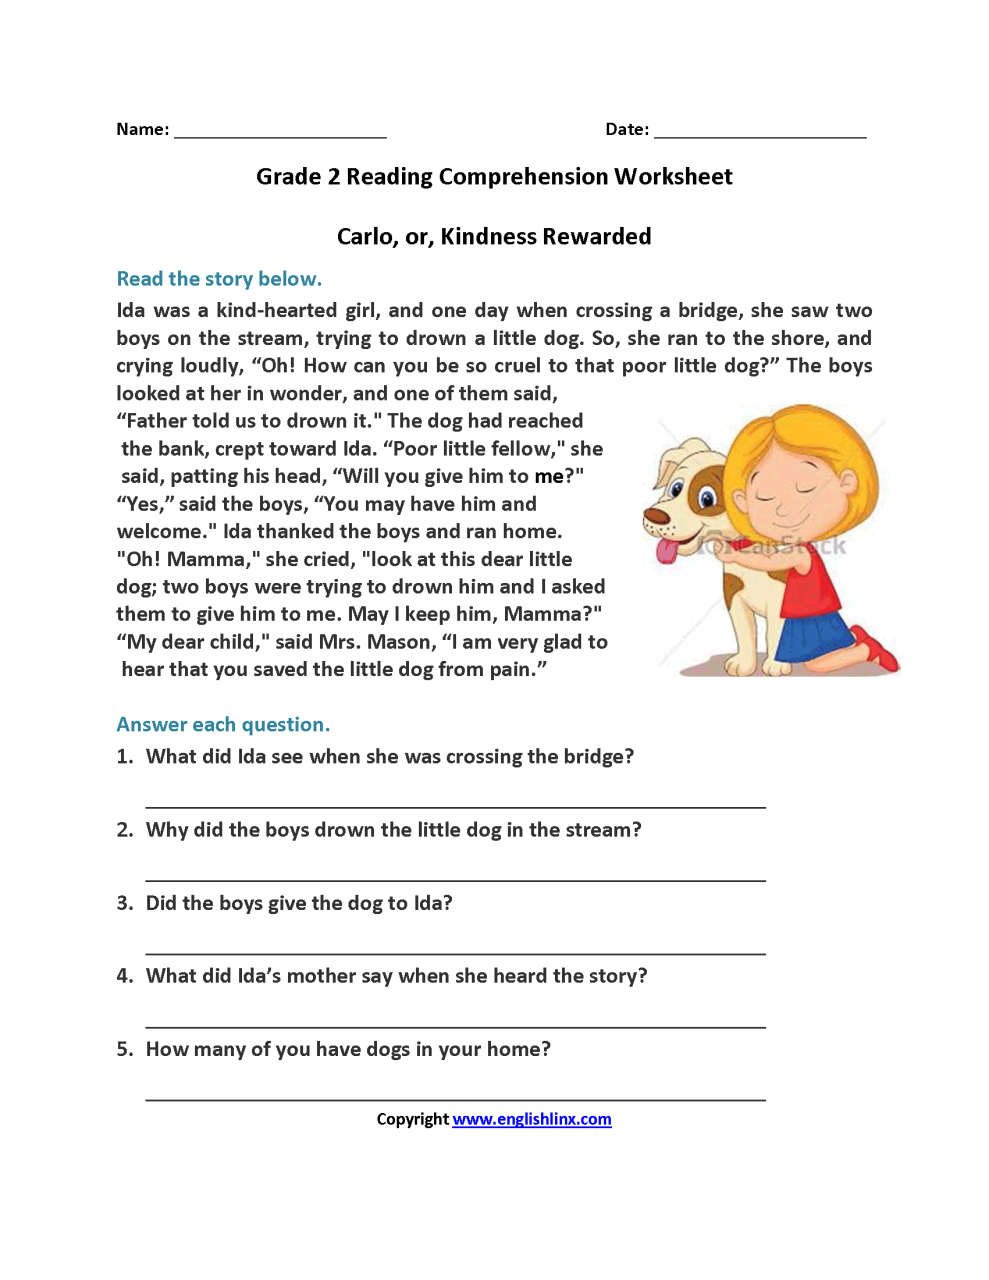 Carlo or Kindness Rewarded Second Grade Reading Worksheets 2nd grade